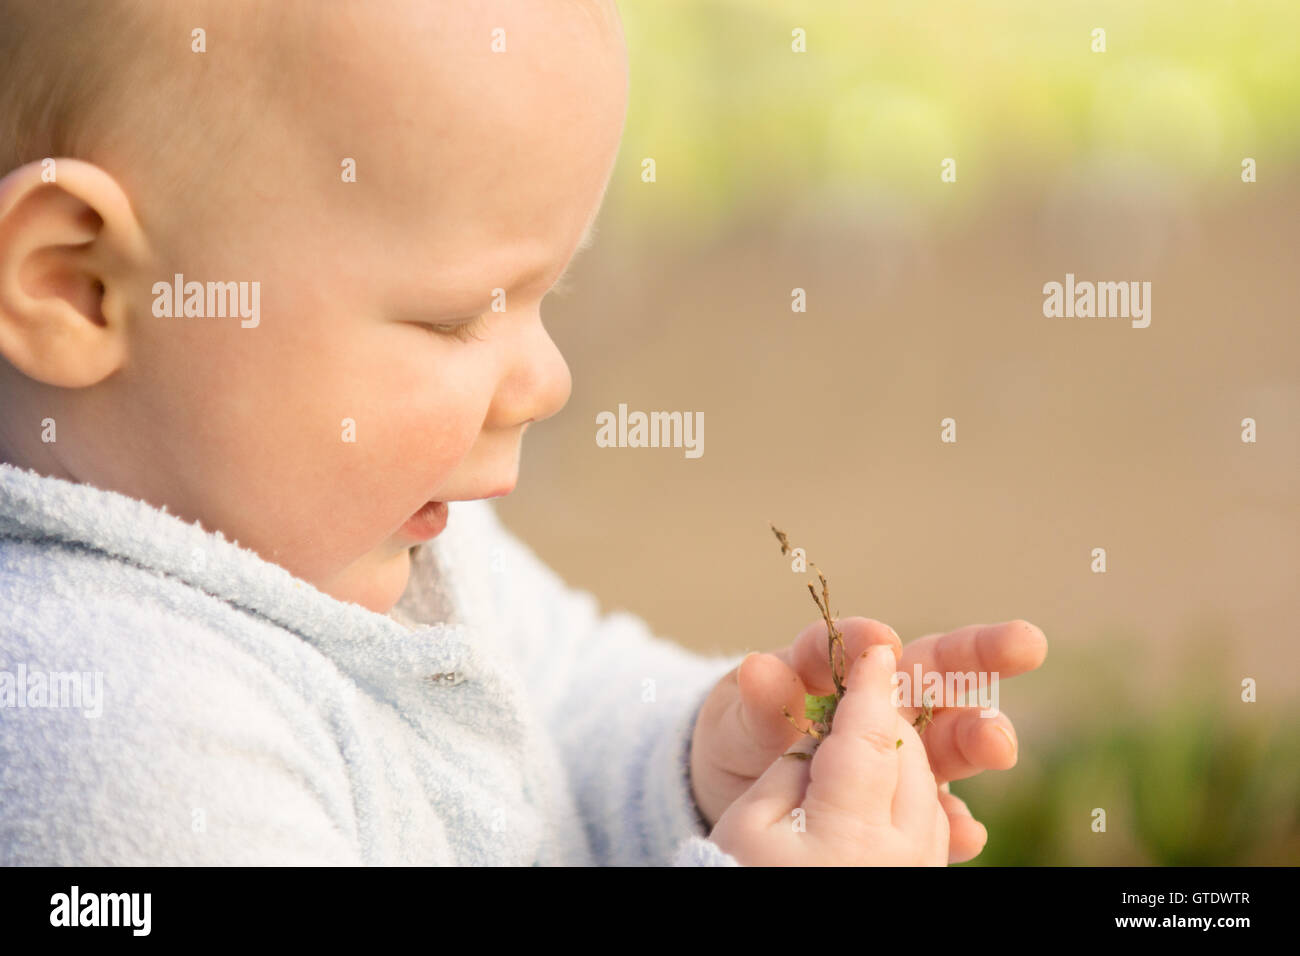 Baby playing with grass and dirt, feeling different textures Stock Photo